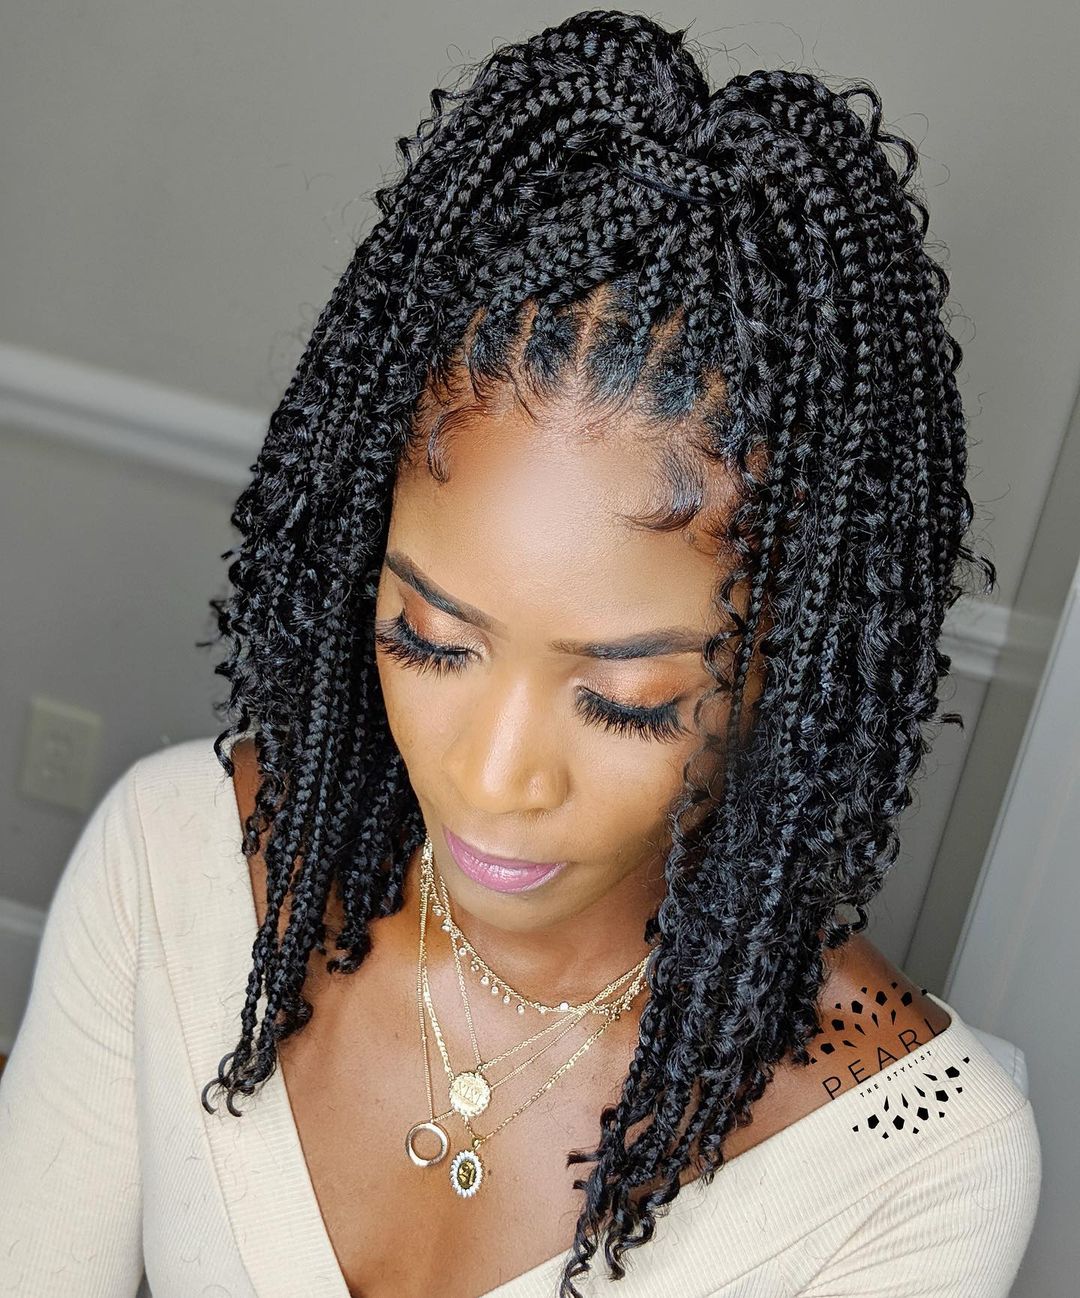 Knotless braids with loose curls